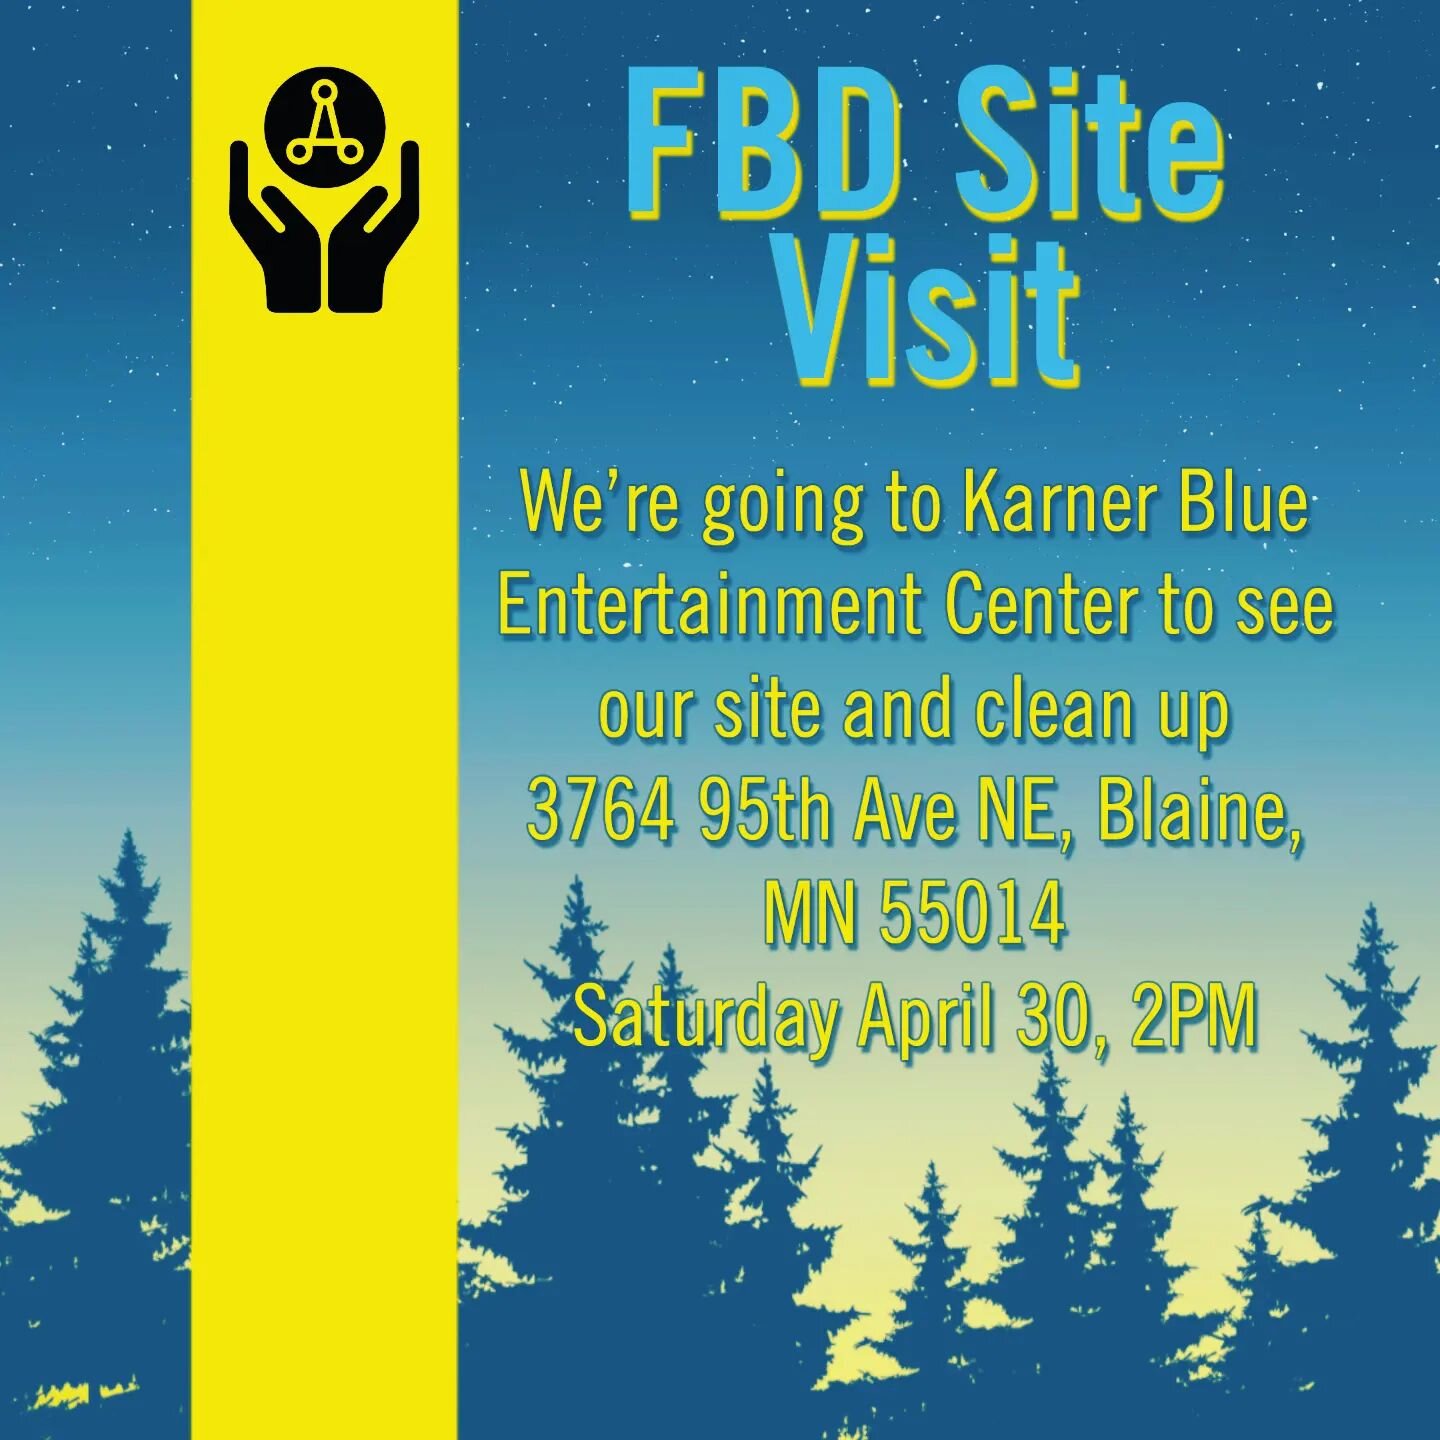 We're going to our client, Karner Blue Education Center this Saturday to clean up and see where we'll be working! Join us!